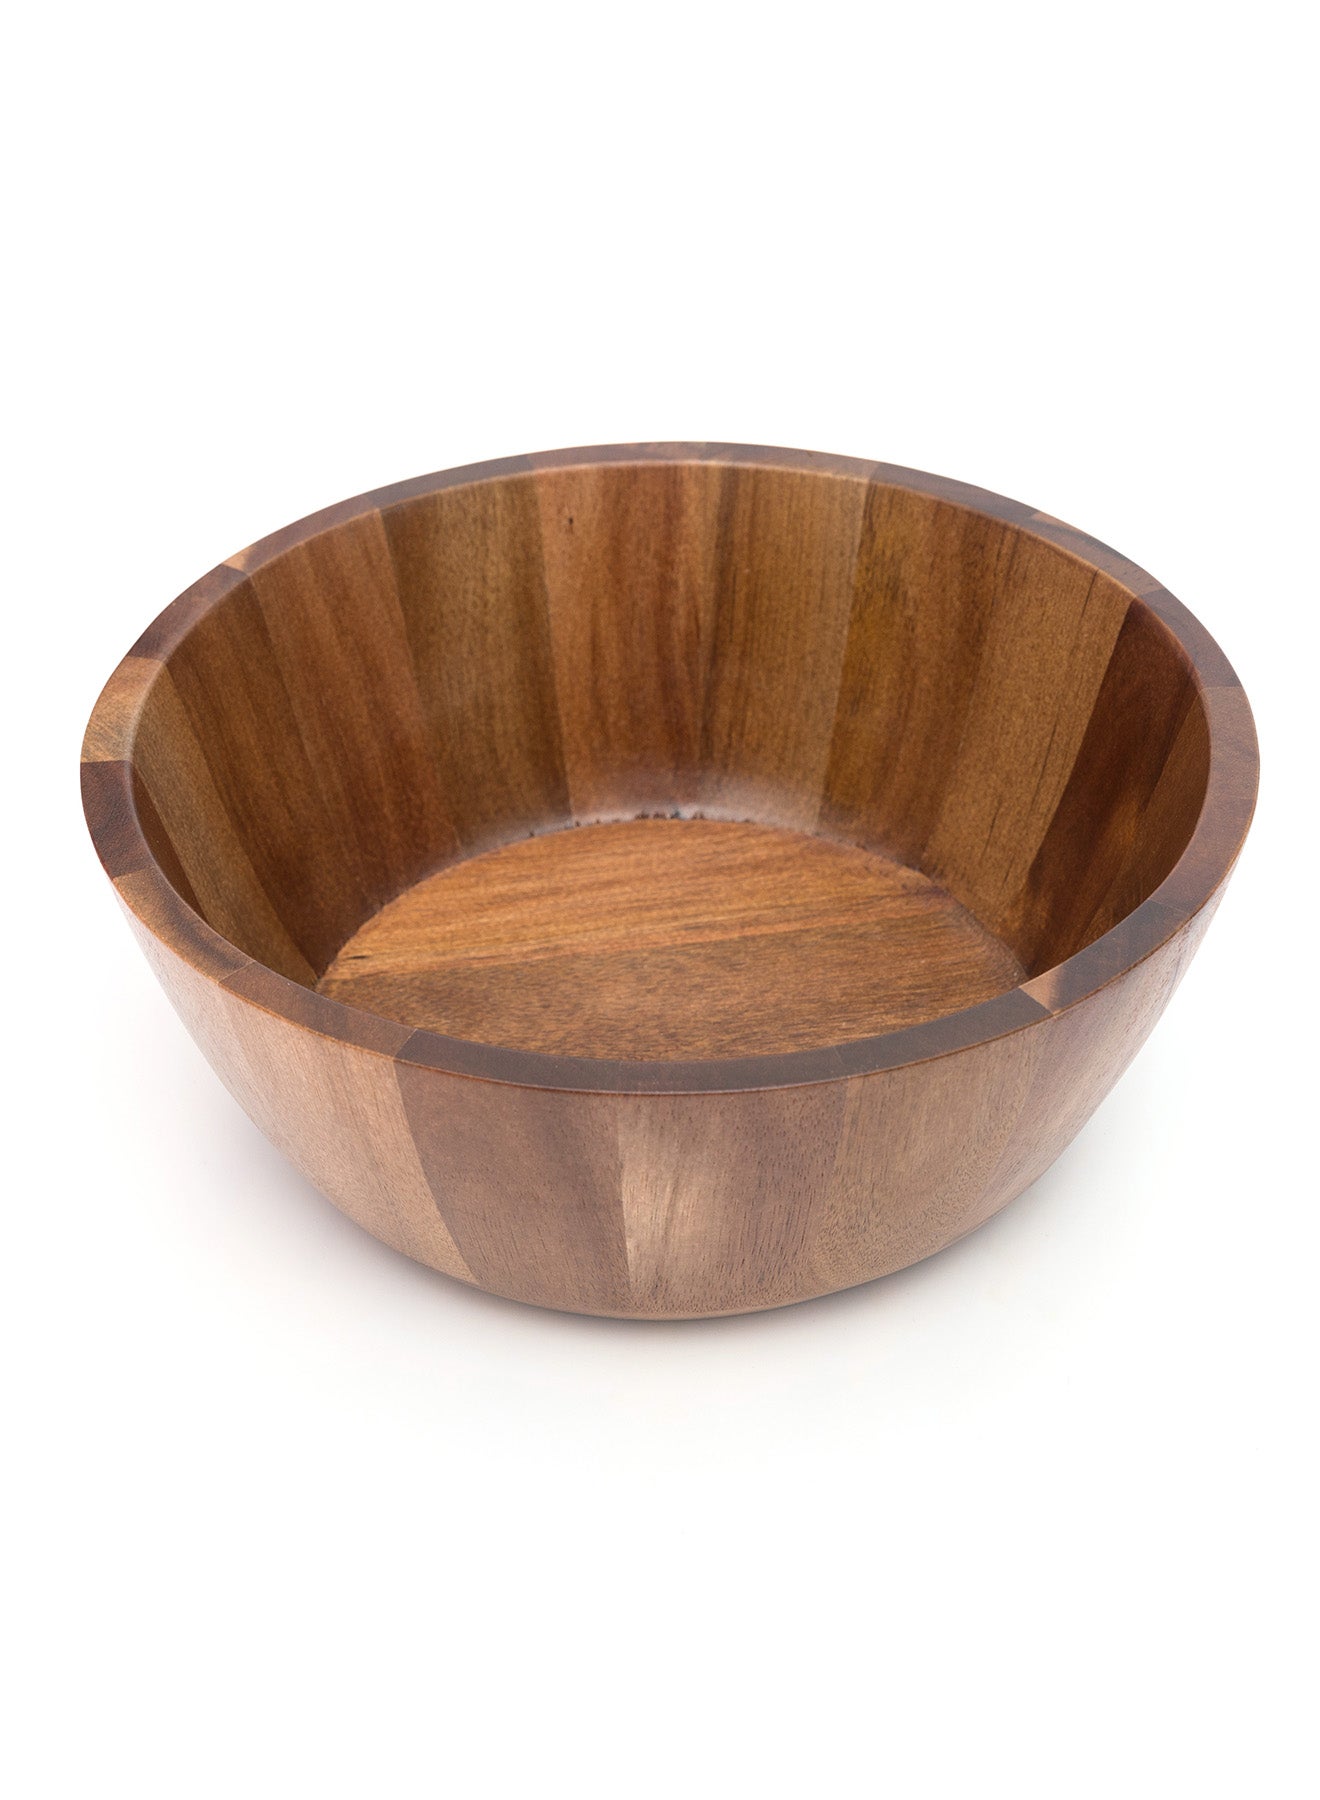 Salad Bowl - Made Of Acacia Wood - Premium Quality - Wooden Bowl - Serving Dishes - By Noon East - Dark Brown